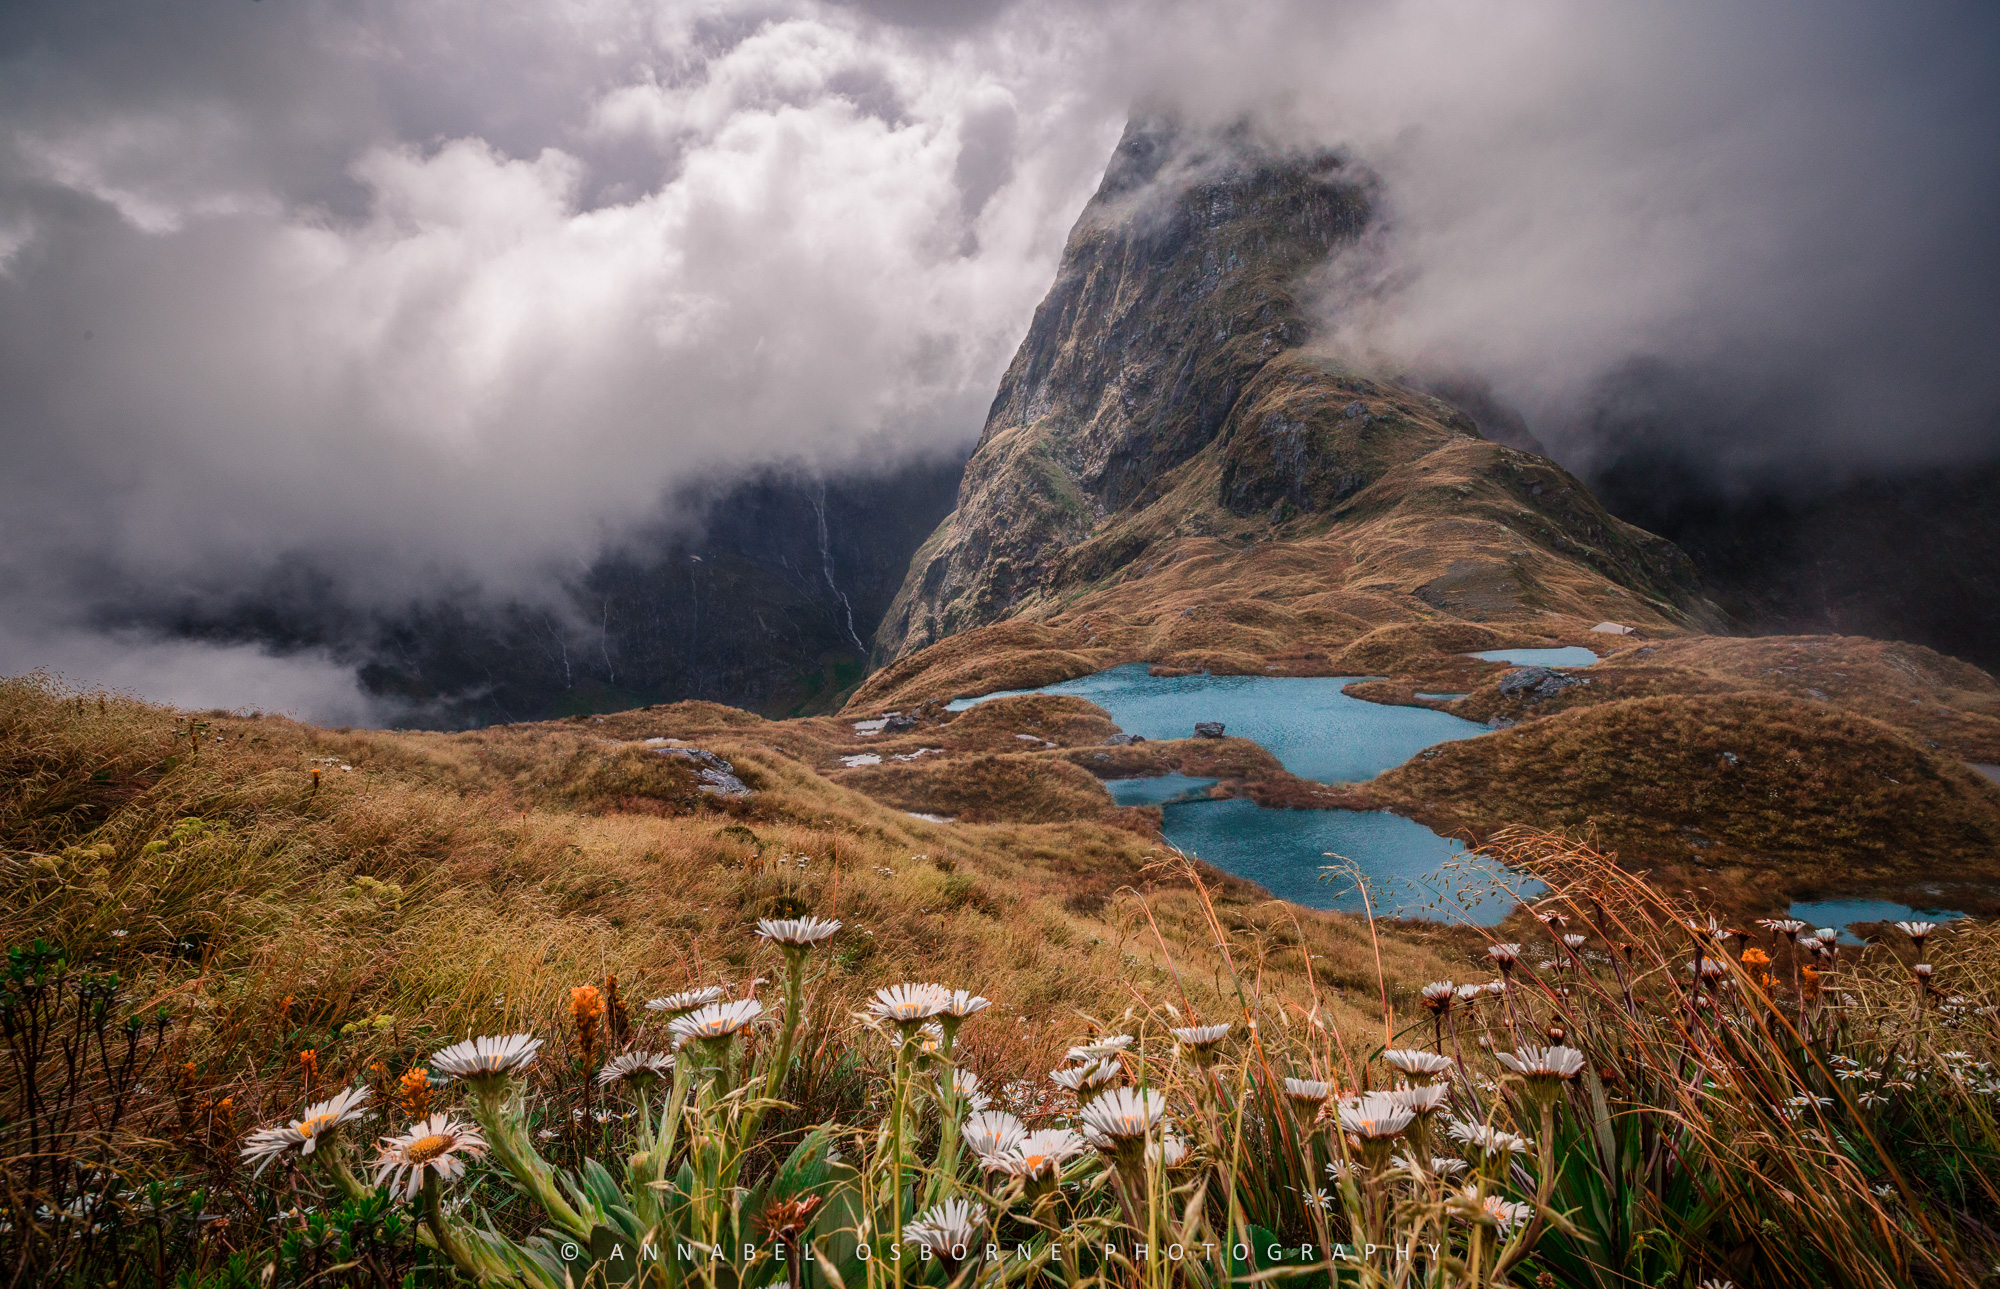 Atop MacKinnon's Pass - Blue Lakes and daisys-2019.jpg